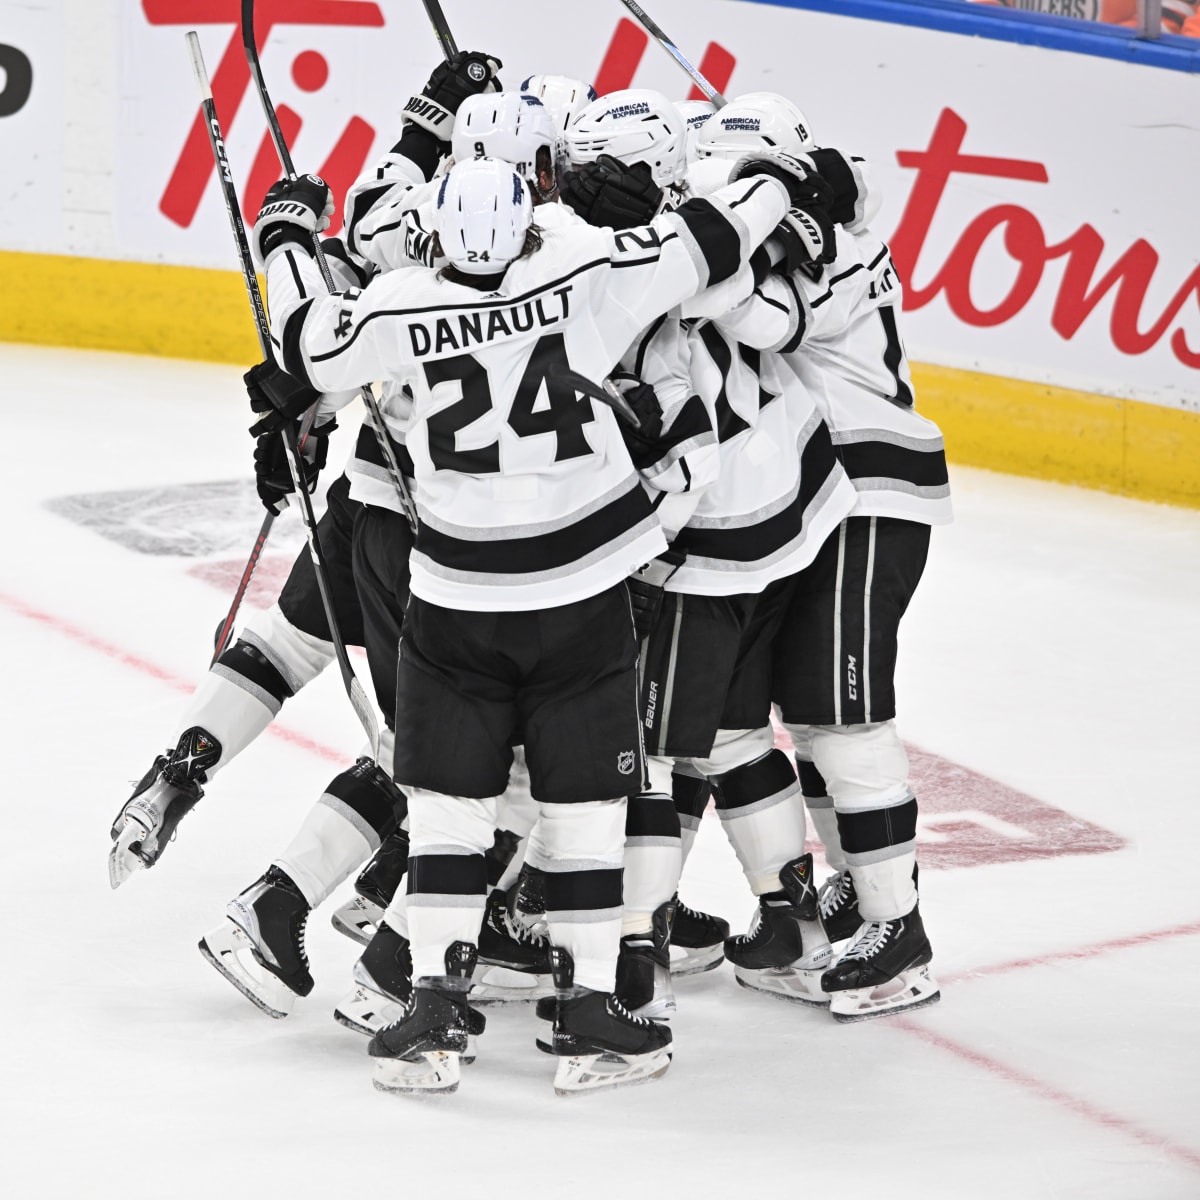 Why have Los Angeles Kings stumbled on way to Stanley Cup?